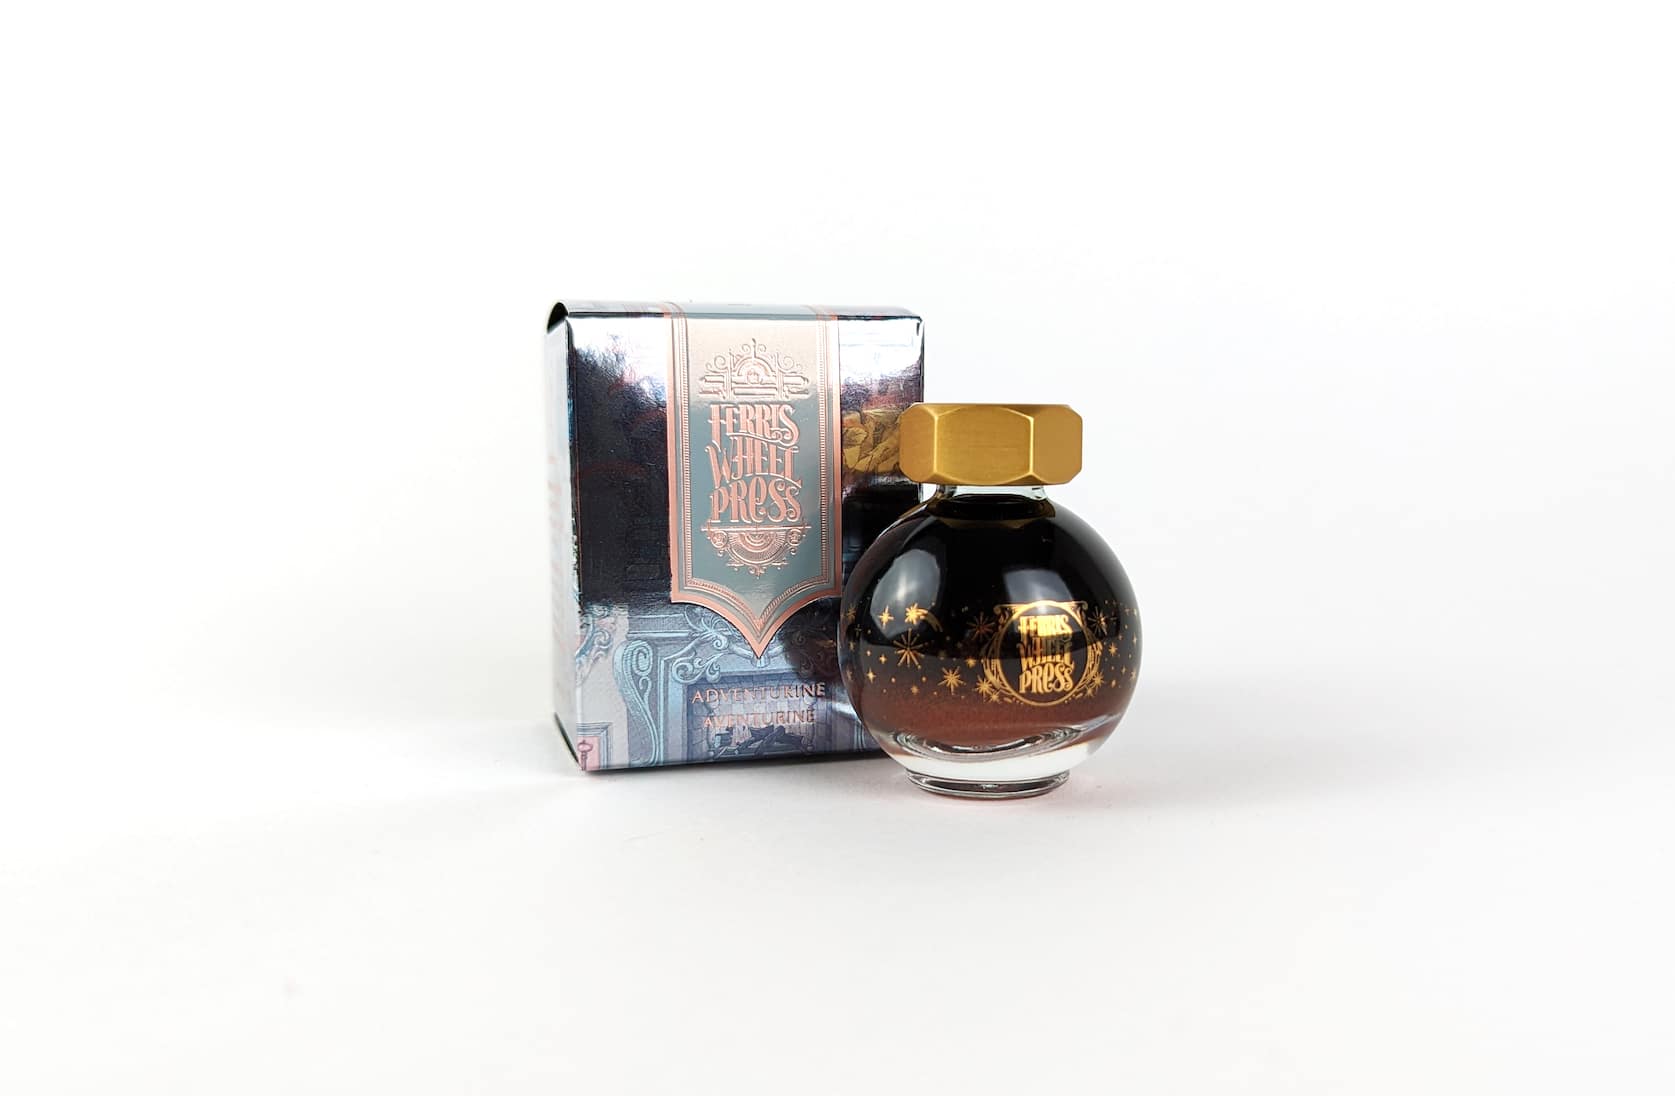 An ornate rose gold, lilac and grey cardboard box with pink text that reads Ferris Wheel Press: Adventurine. Aventurine. Beside the box there is a round glass bottle of ink with a gold lid. On the bottle there is a small gold illustration featuring stars and sparkles.